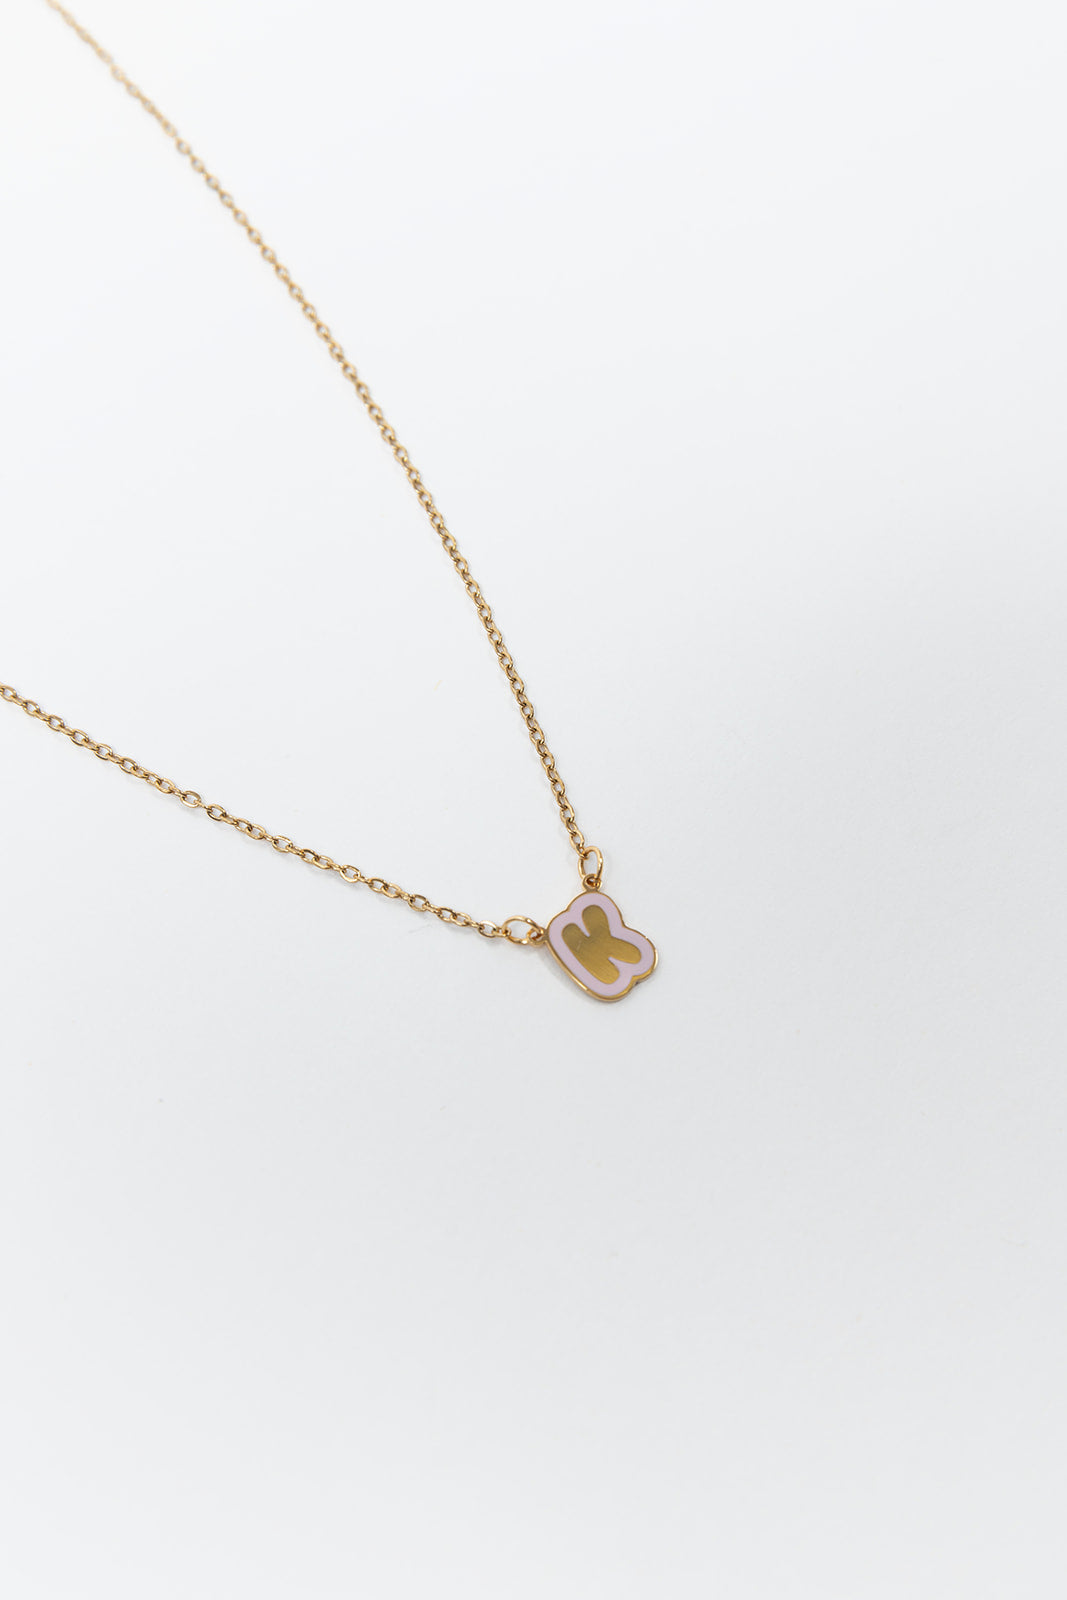 Bal Harbour Initial Necklace